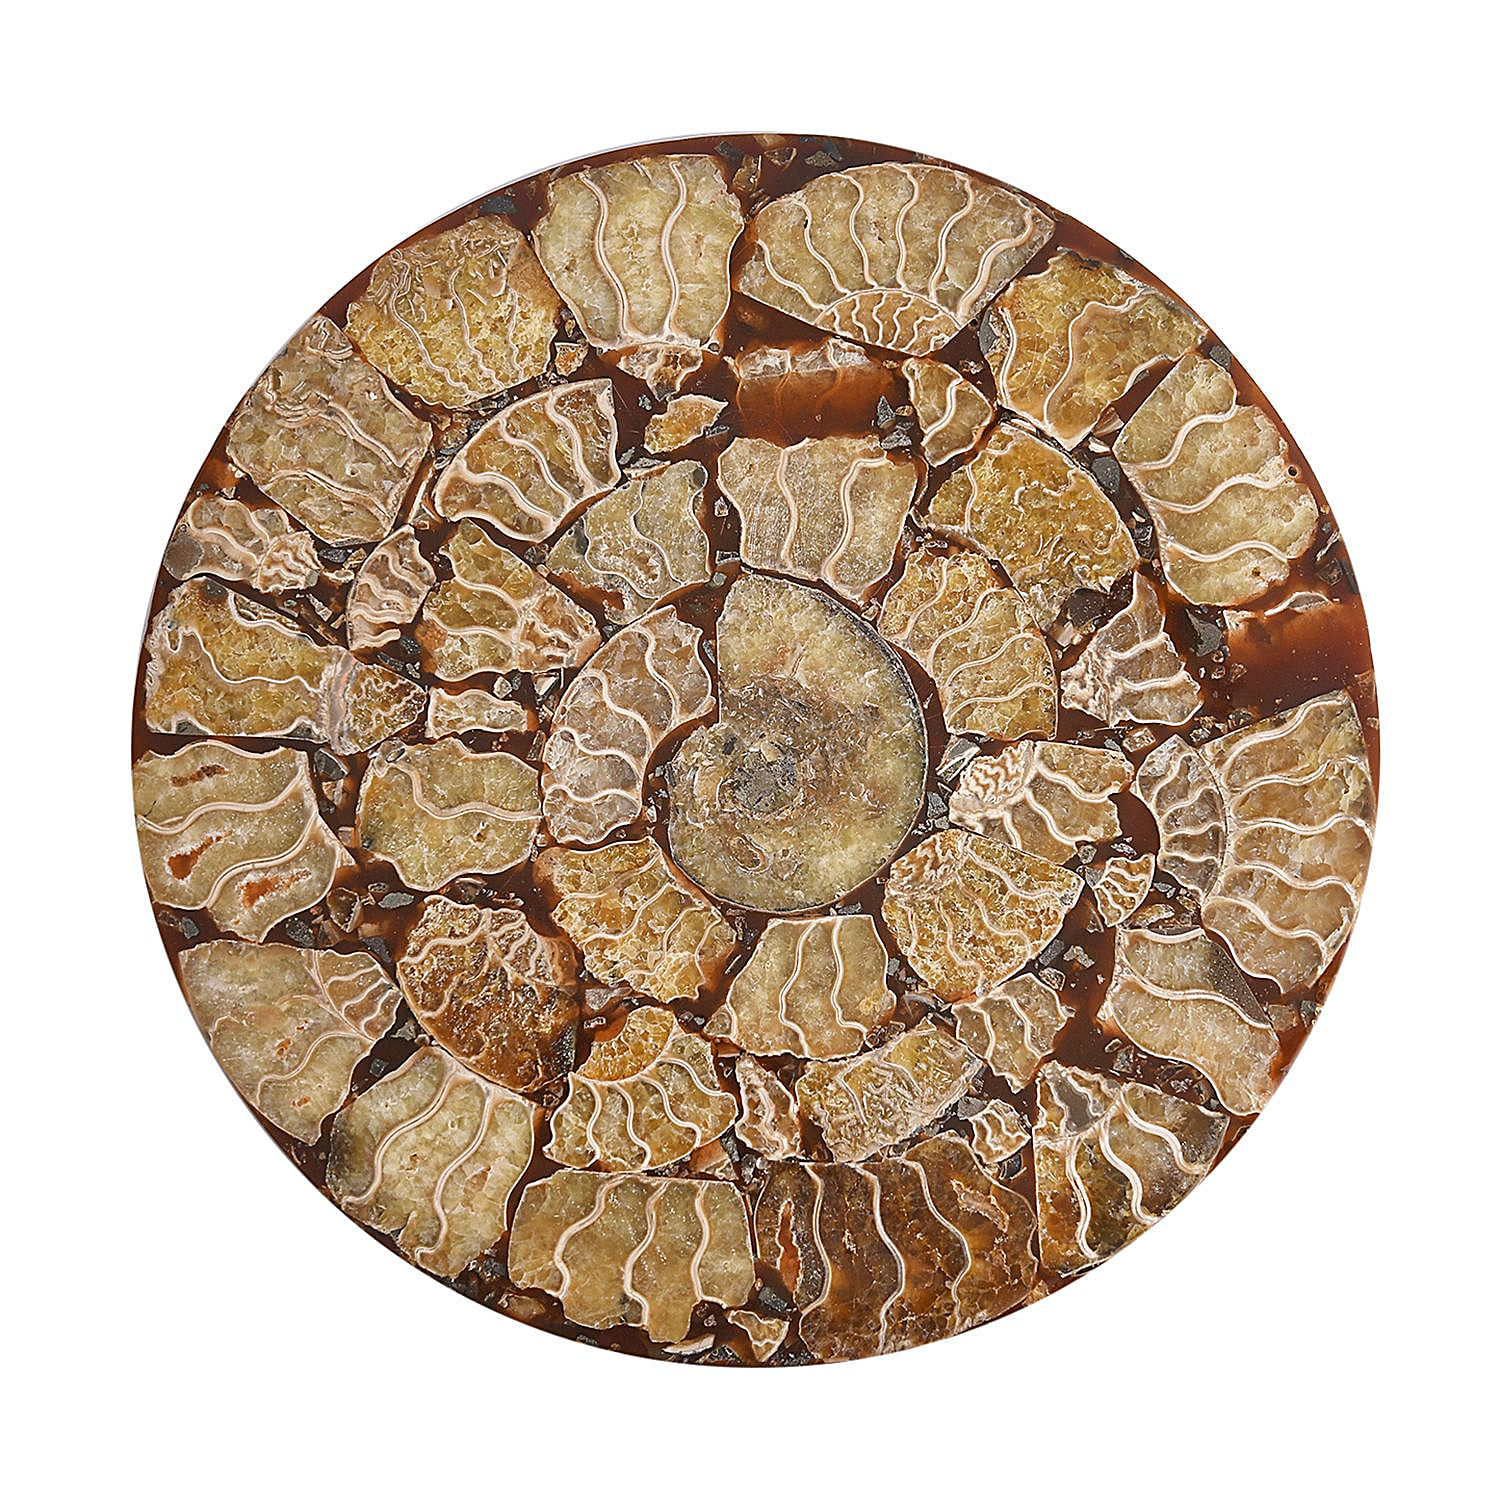 Limited Available - Natural Ammonite Fossil Shell Home Decor 4300 Ct